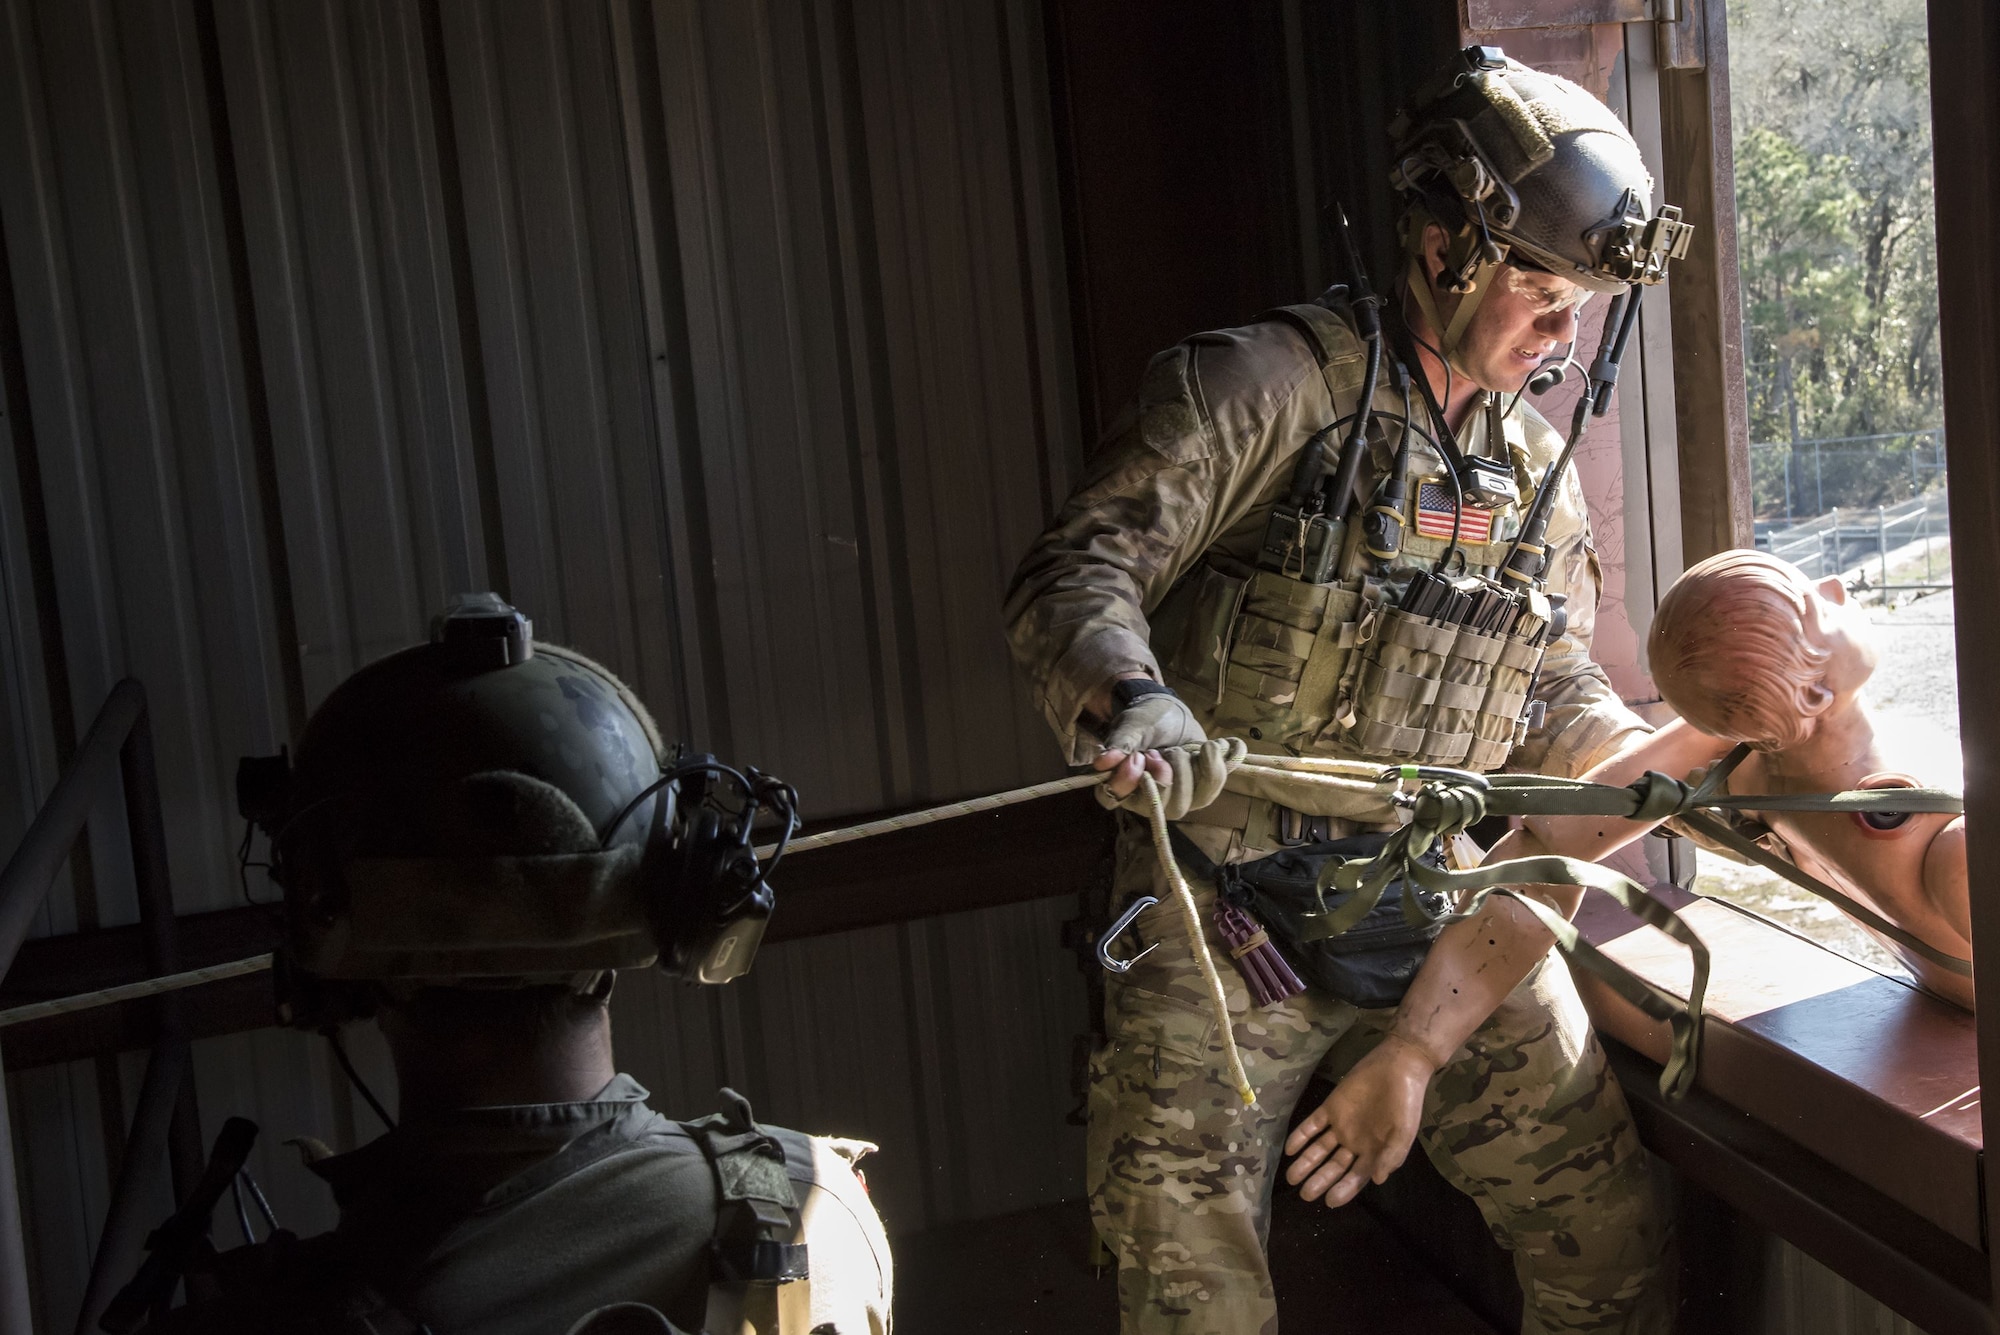 Pararescuemen from the 38th Rescue Squadron (RQS) propel a mannequin out of a window during a full mission profile exercise, Dec. 12, 2017, at Moody Air Force Base, Ga. During the training, the 38th RQS recovered victims while under enemy fire to prepare for future search and rescue missions and to assess their unit’s ability to work cohesively to accomplish the mission. (U.S. Air Force photo by Airman Eugene Oliver)